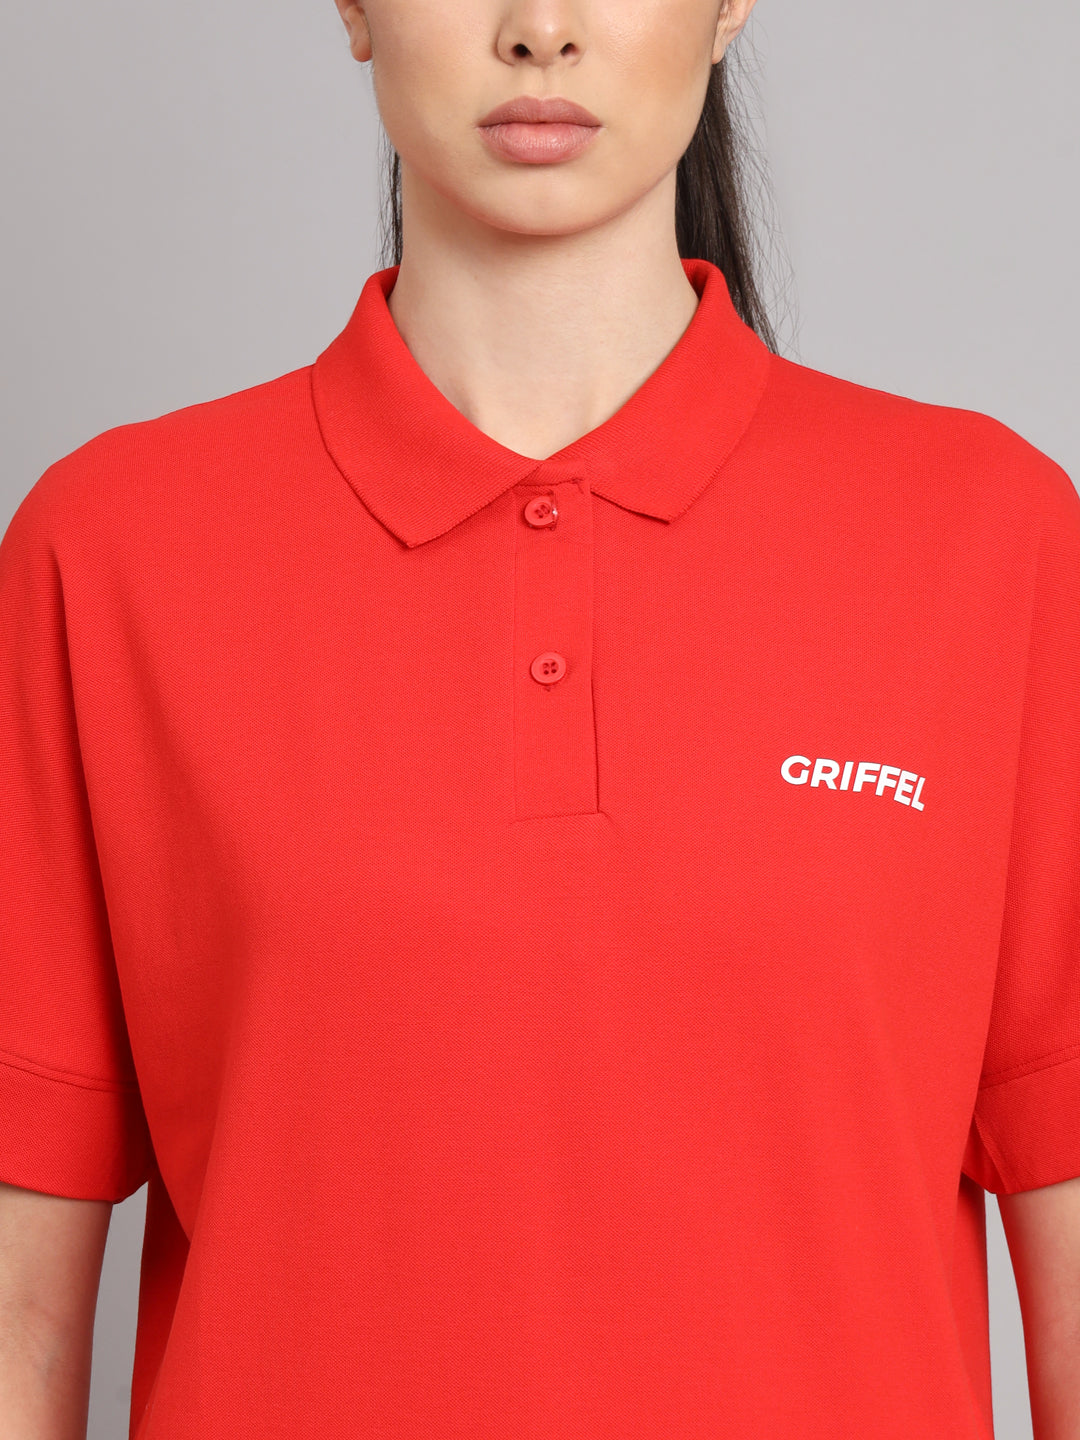 GRIFFEL Women Basic Solid Red Polo T-shirt - griffel